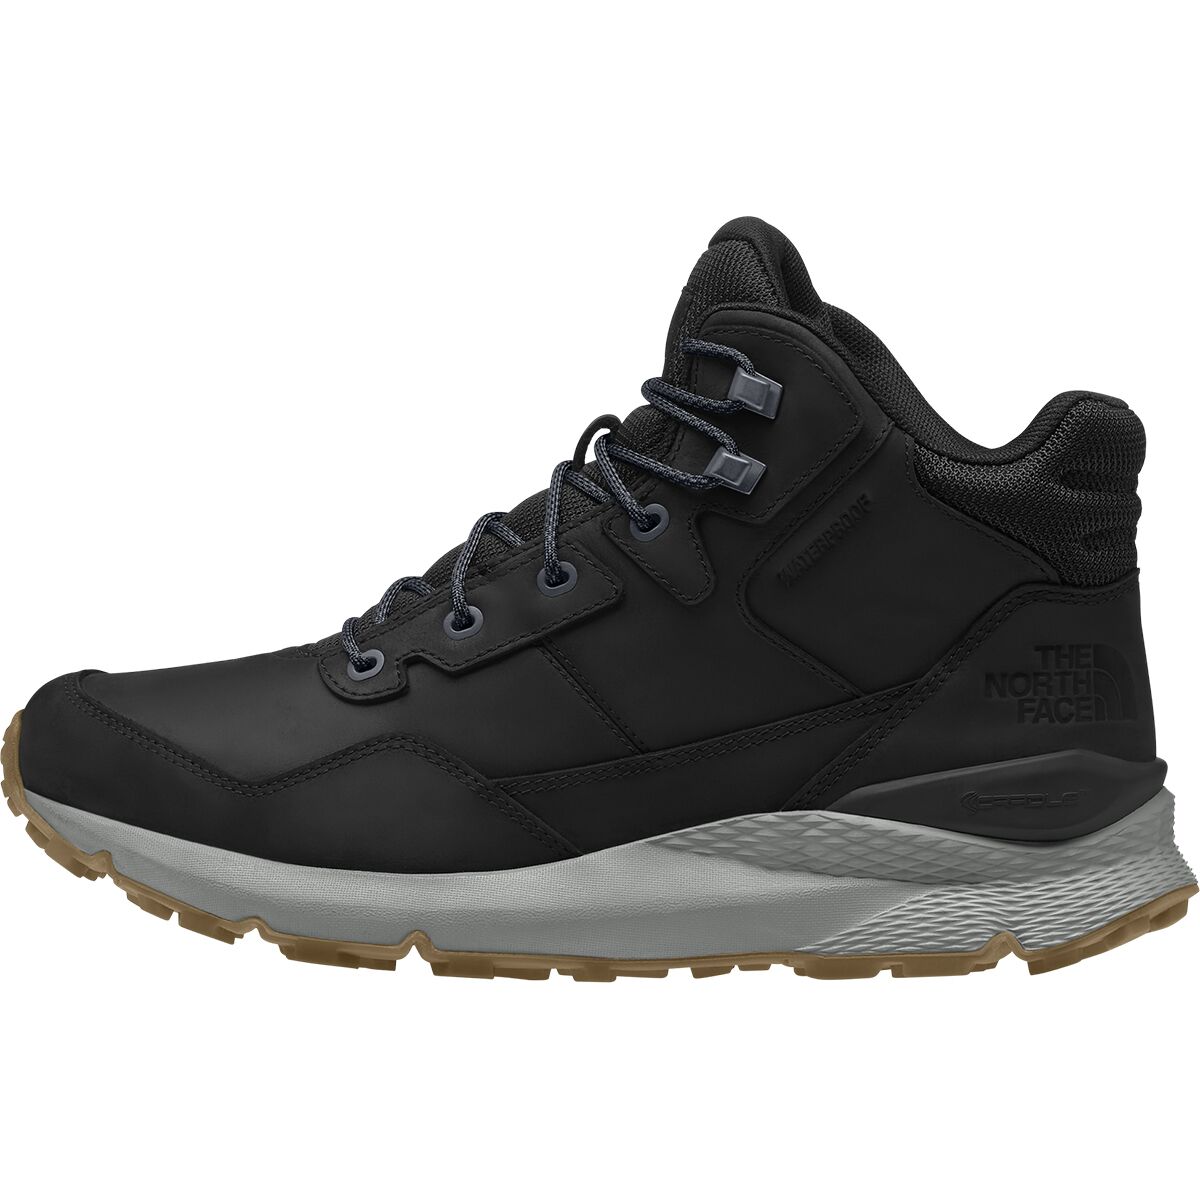 The North Face Vals II Mid Leather WP Boot - Men's